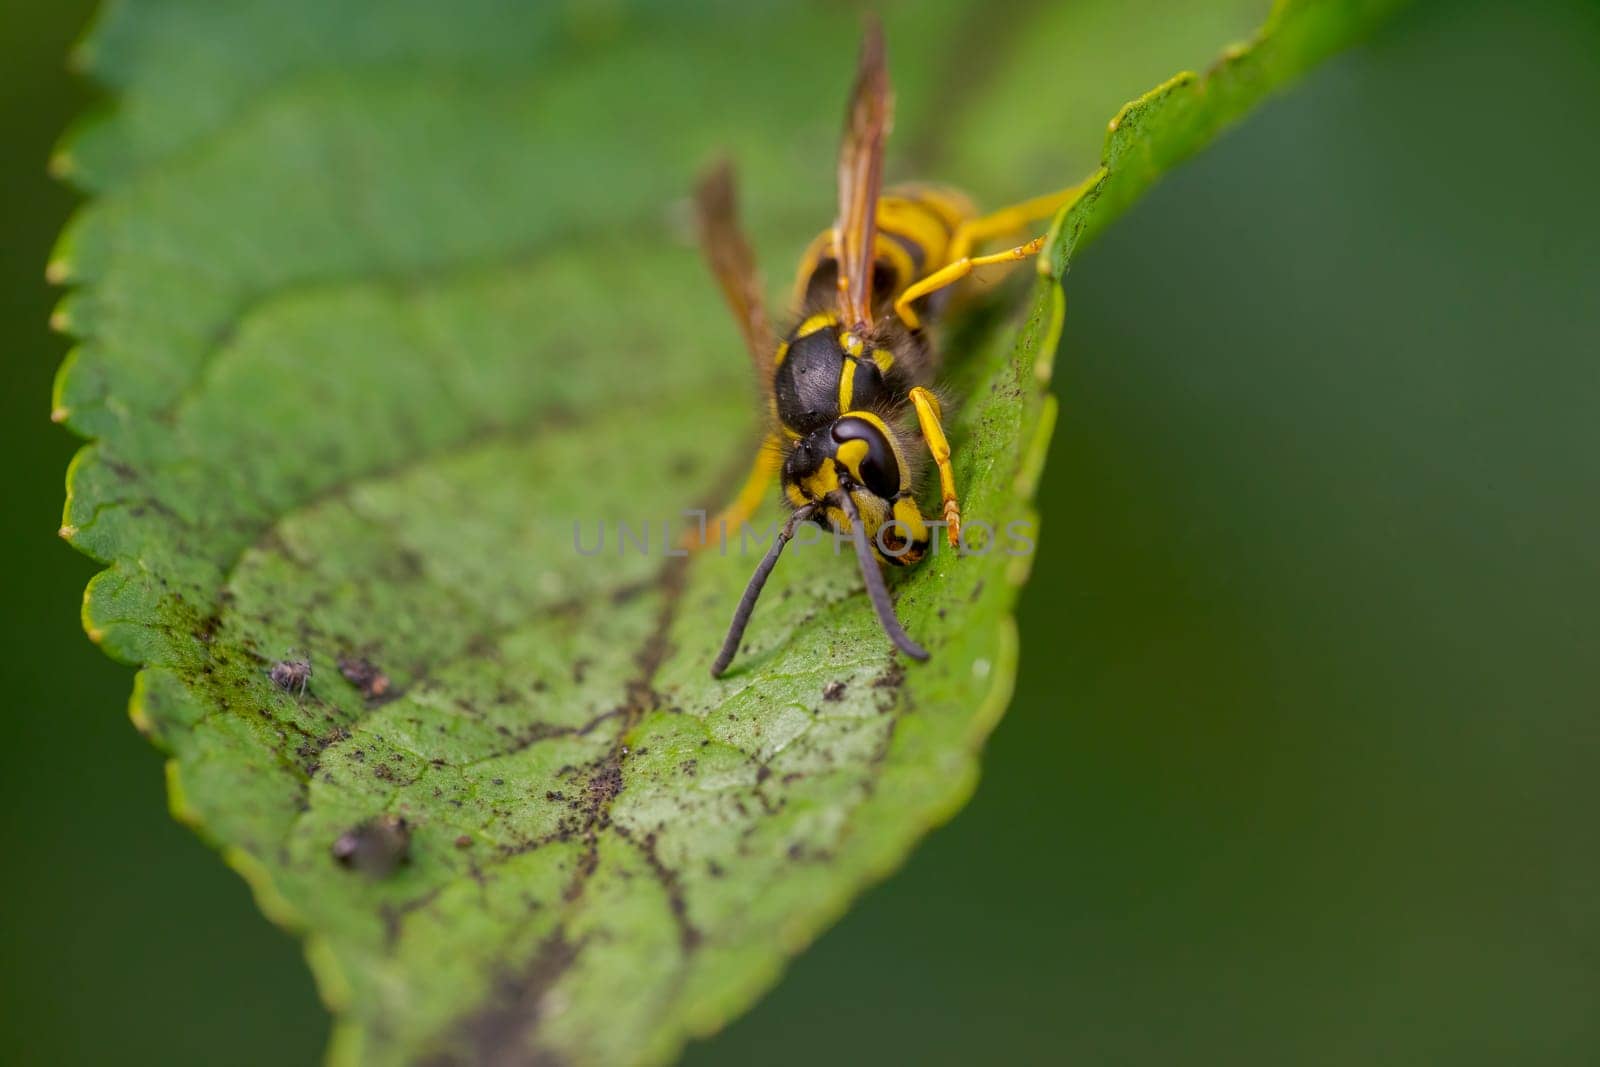 wasp sits on a leaf and nibbles honeydew from aphids by mario_plechaty_photography